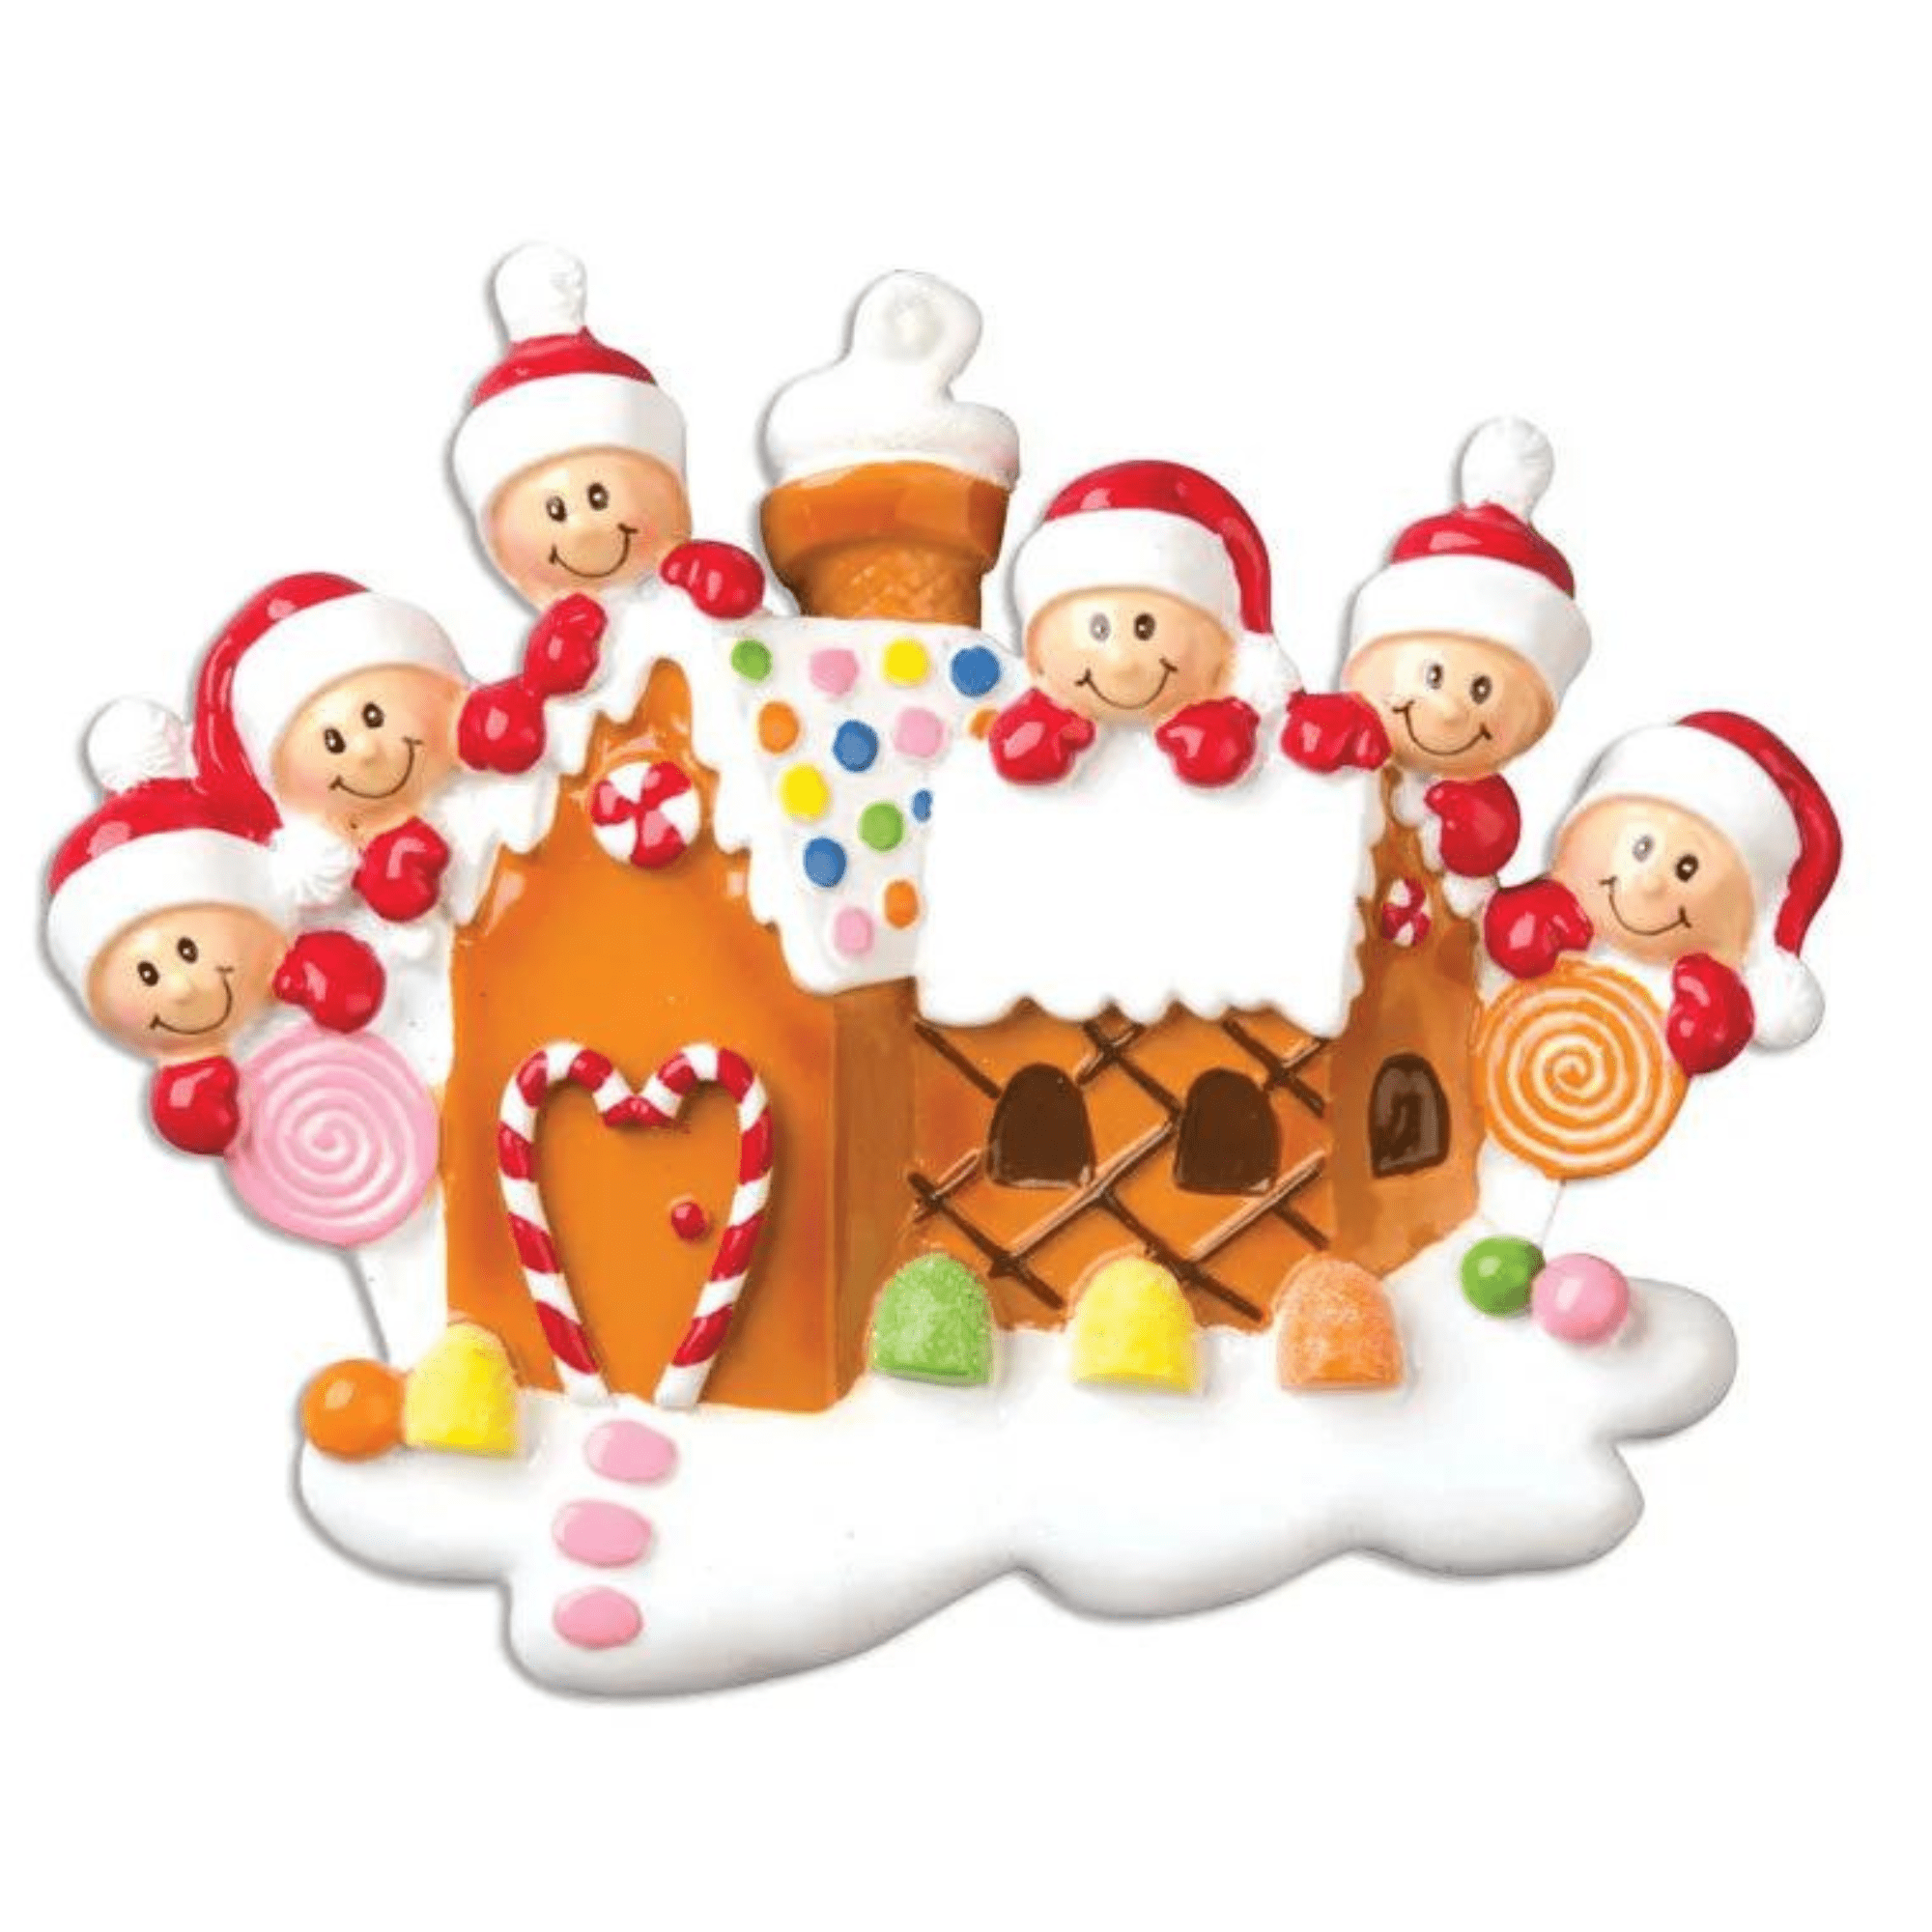 Gingerbread Tree Decoration 2-6 people